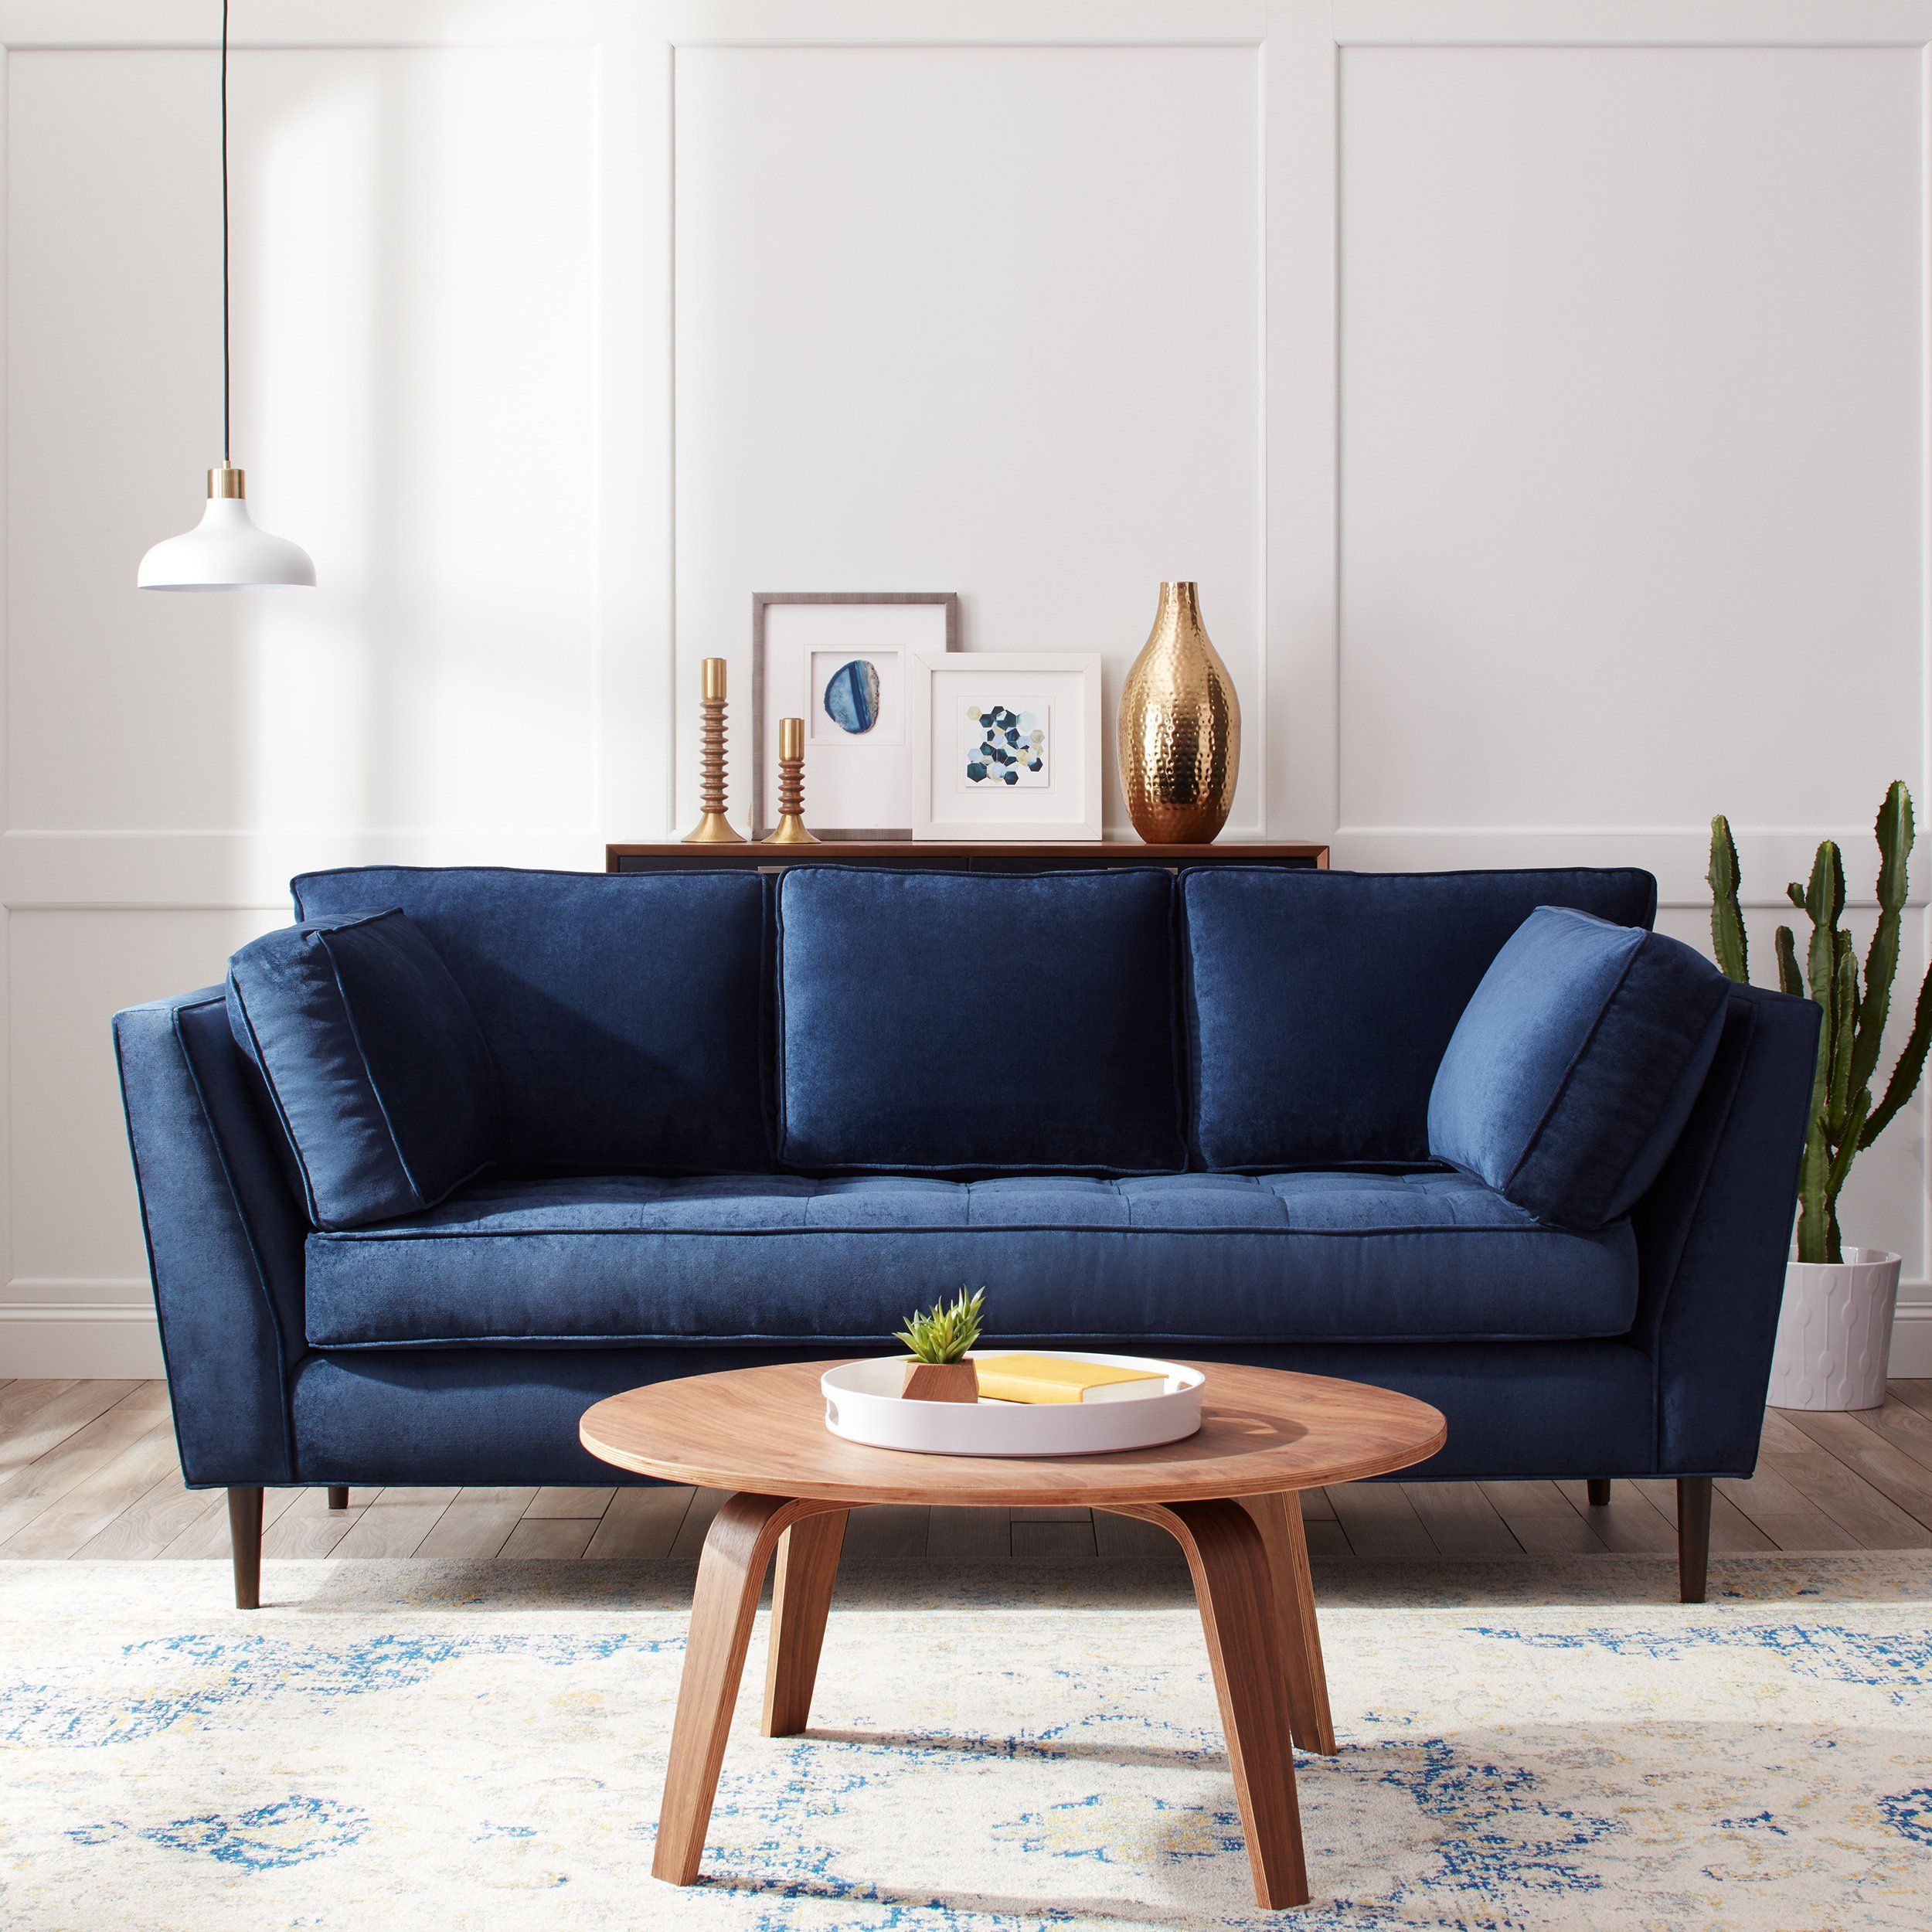 Our Best Living Room Furniture Deals | Blue Sofa Living, Blue Couch In Sofas In Blue (View 2 of 20)